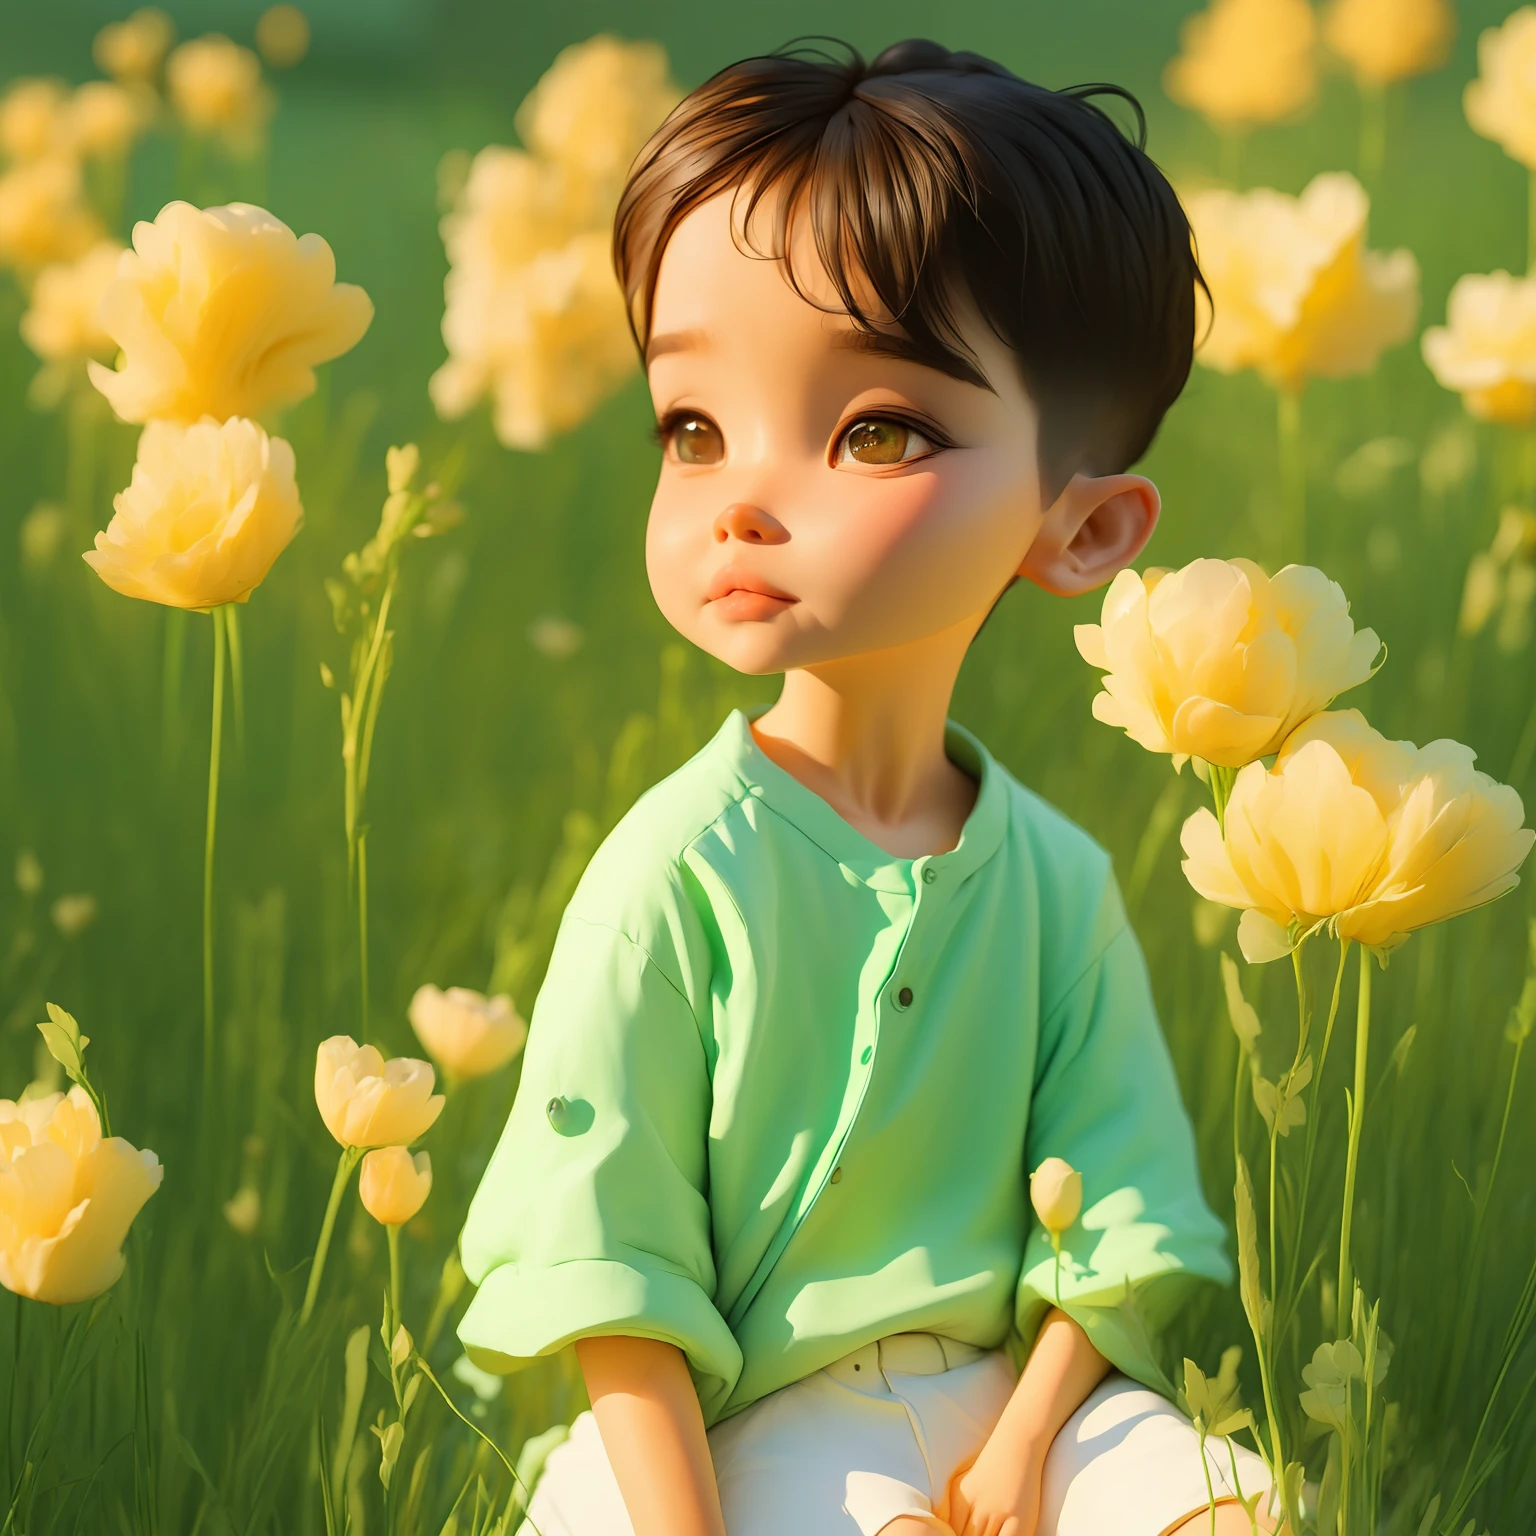 Anime style cute boy, Light brown bun hair, honey-colored eyes, light blue outfit, Tiffany green tones in the background, Beautiful yellow hearts floating, cute baby boy, olhos grandes e brilhantes.